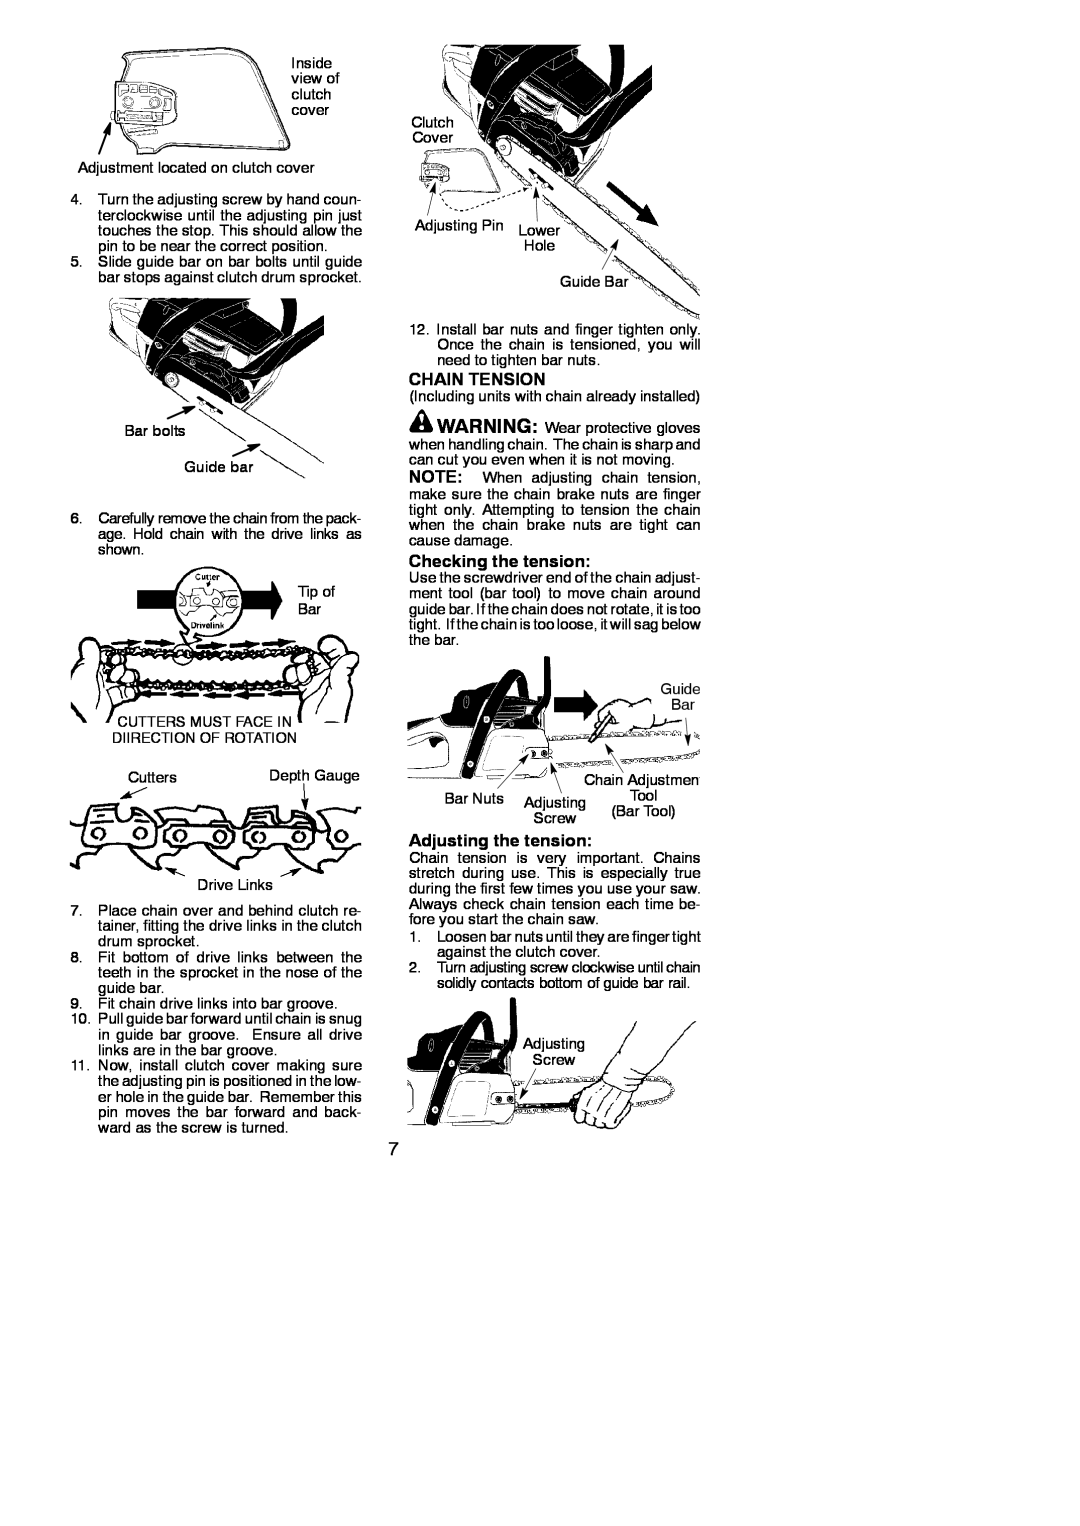 Poulan 966063001 instruction manual Chain Tension, Checking the tension, Adjusting the tension 